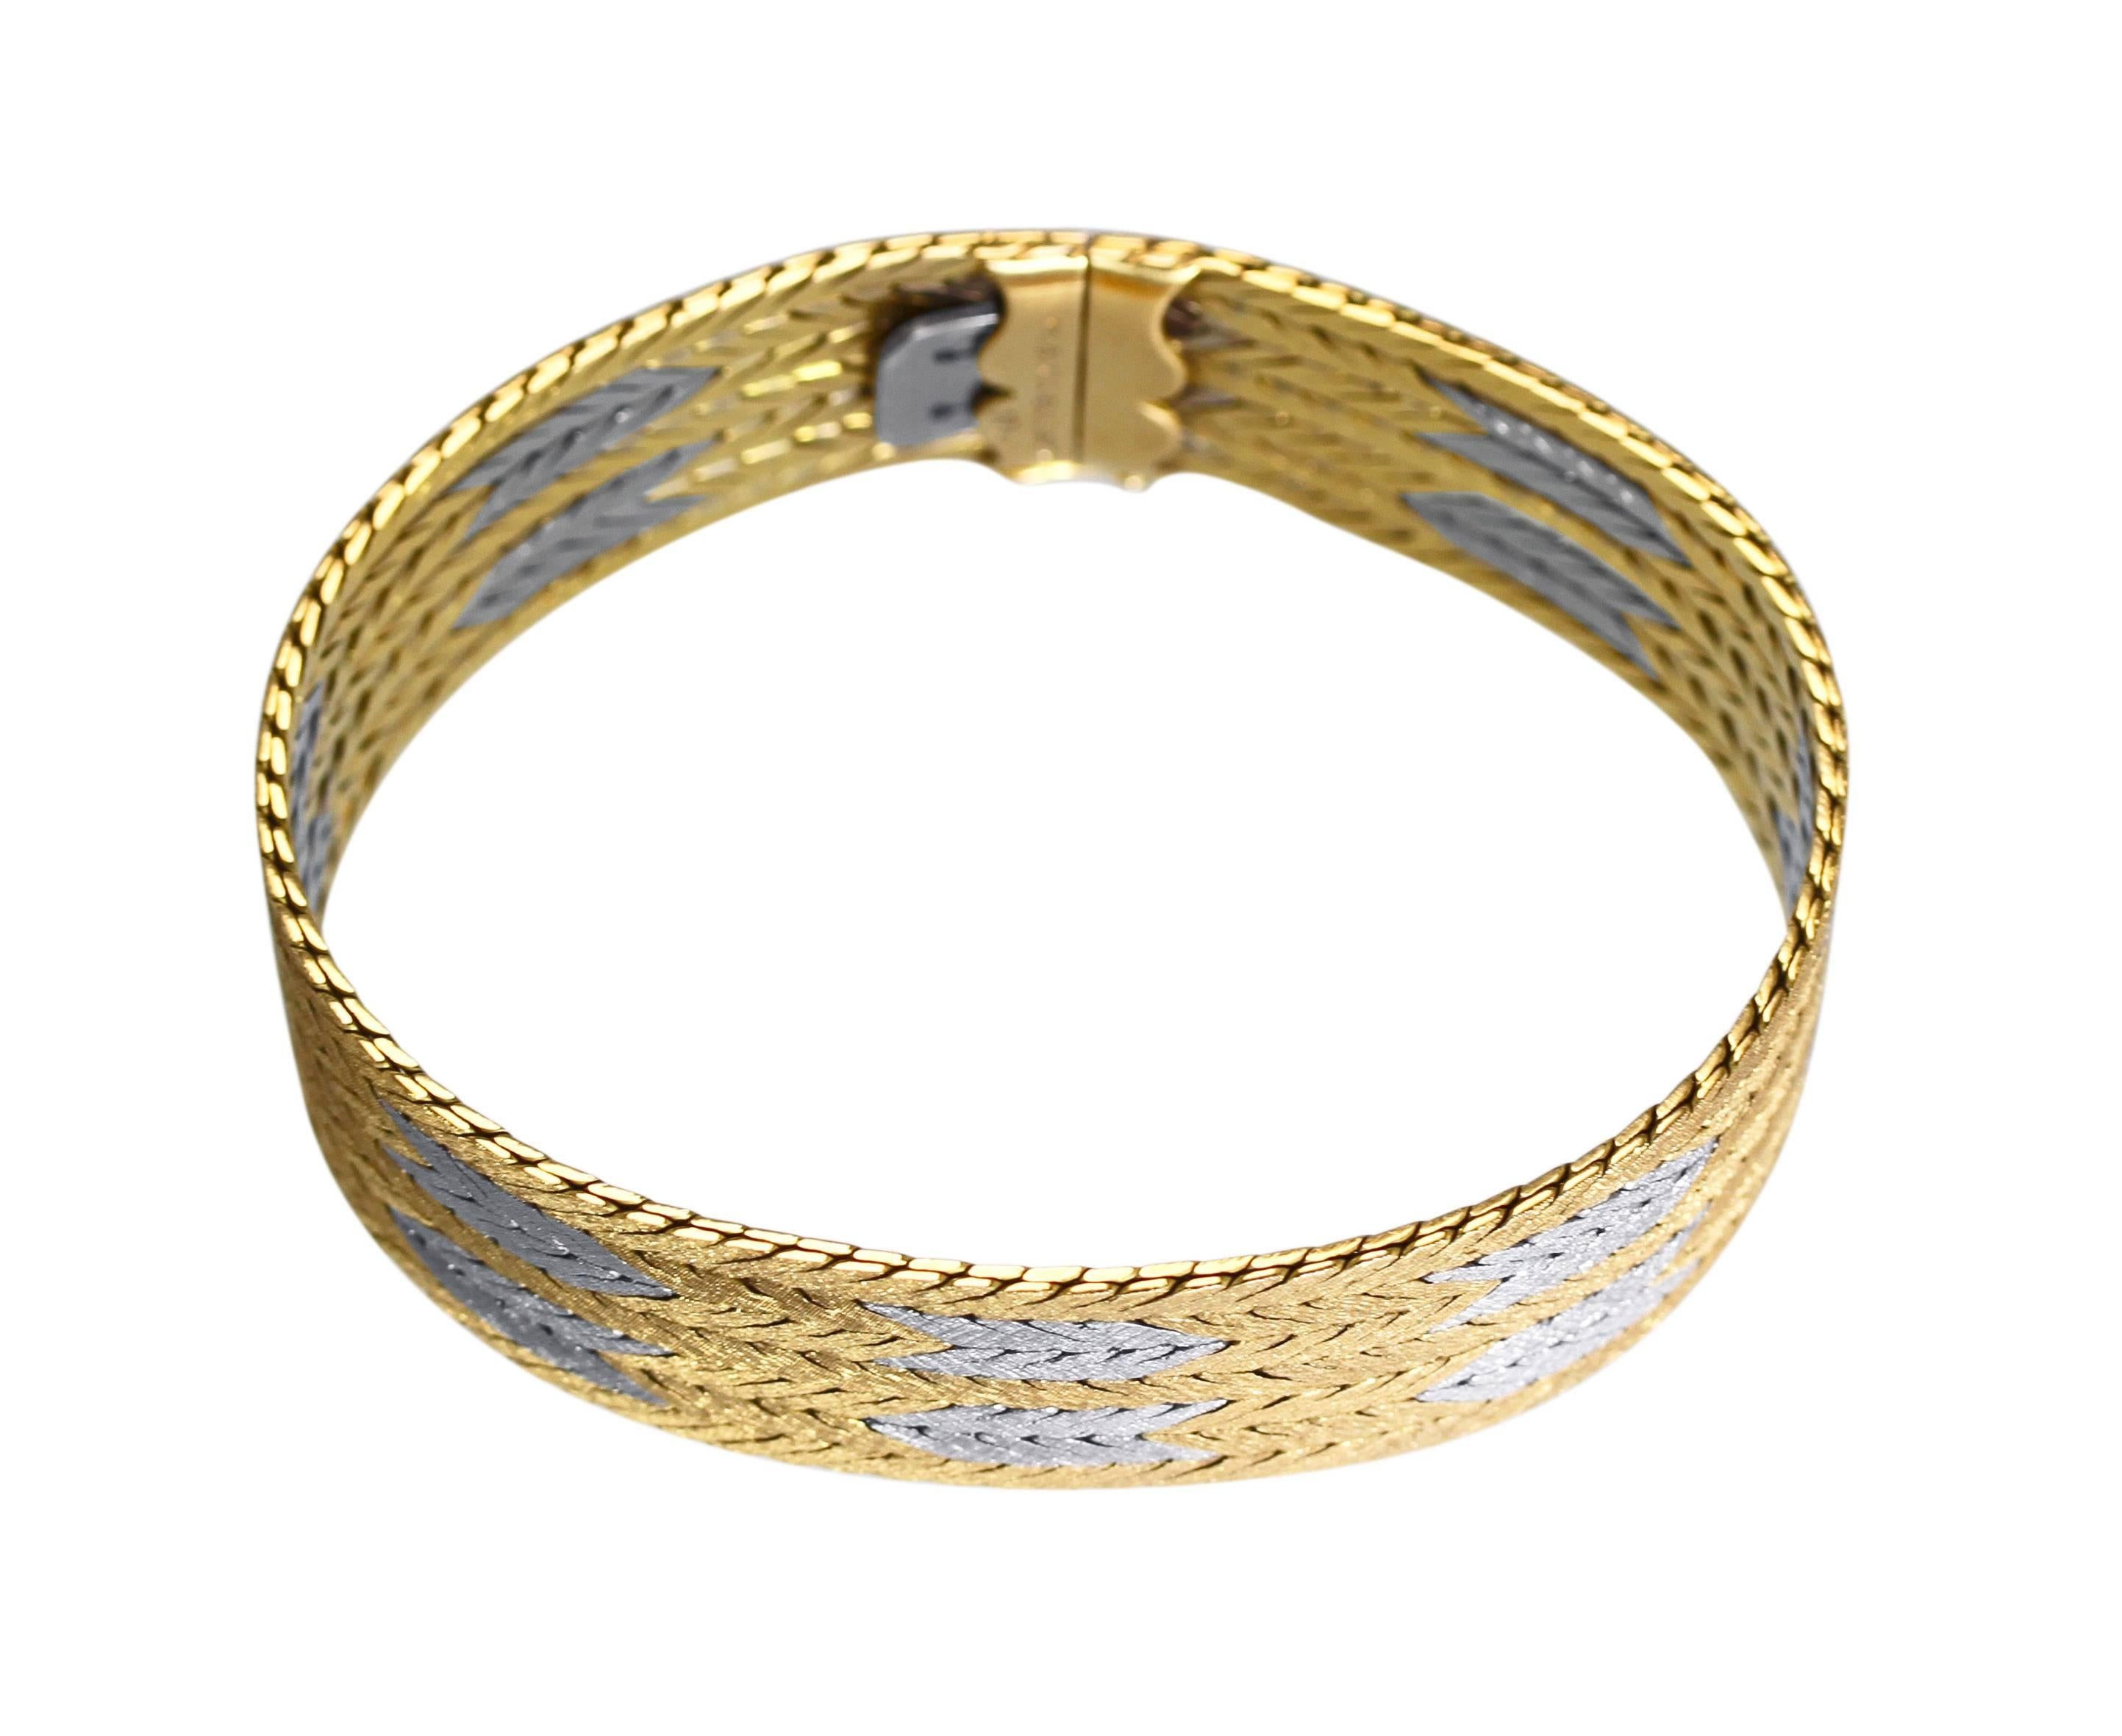 An 18 karat white and yellow gold bracelet by Buccellati, Italy, designed as seven woven strands, length 7 1/2 inches, width 3/4 inch, gross weight of 58.3 grams, and signed M. Buccellati , 18K. 